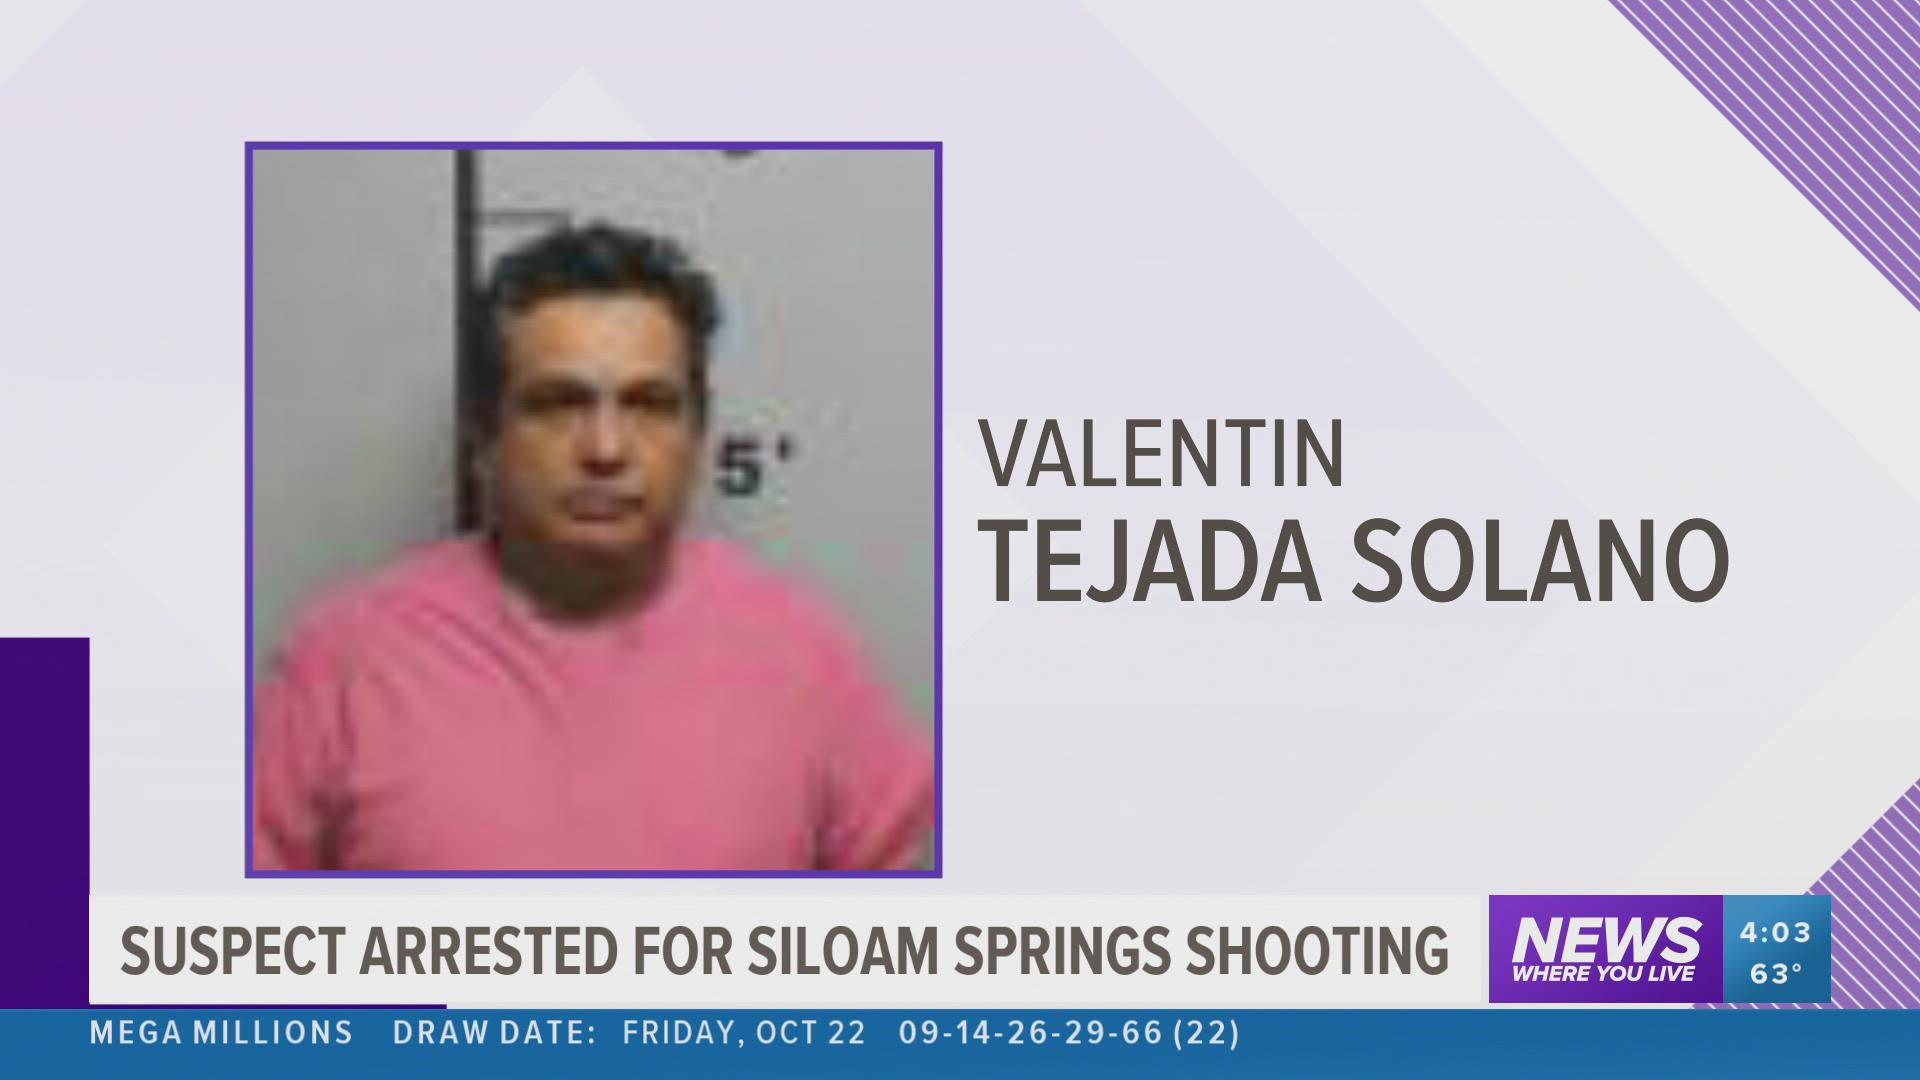 Valentin Tejada Solano has been arrested in connection to a shooting that injured two people.